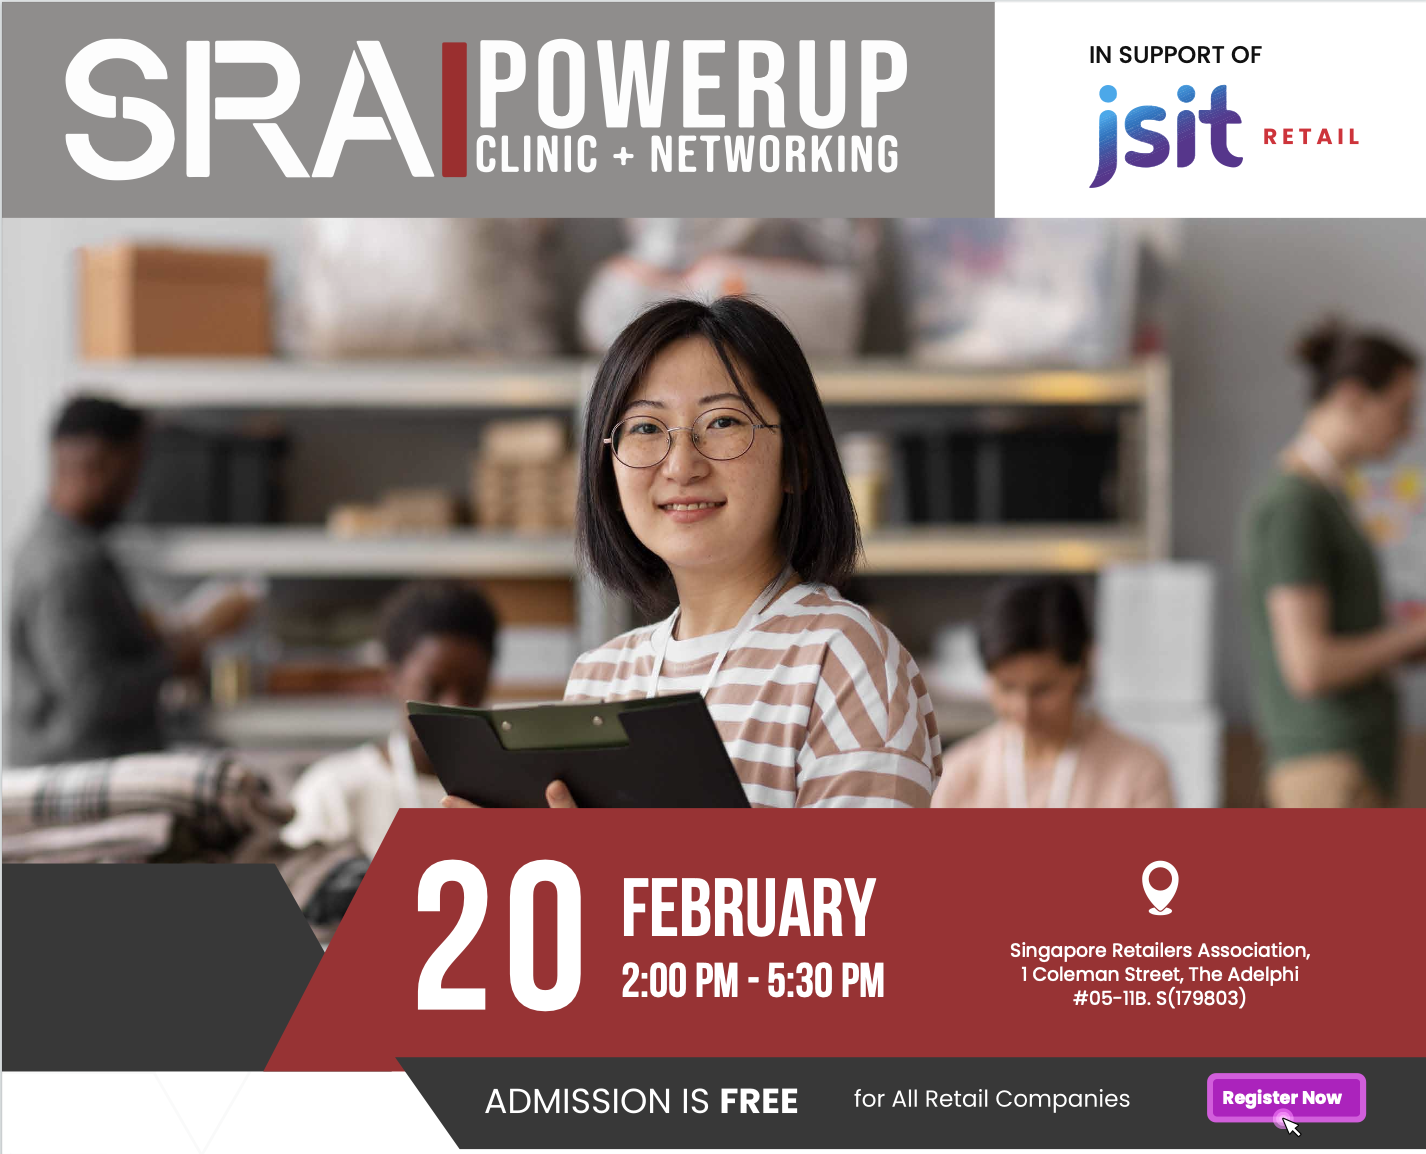 SRA POWERUP CLINIC & NETWORKING